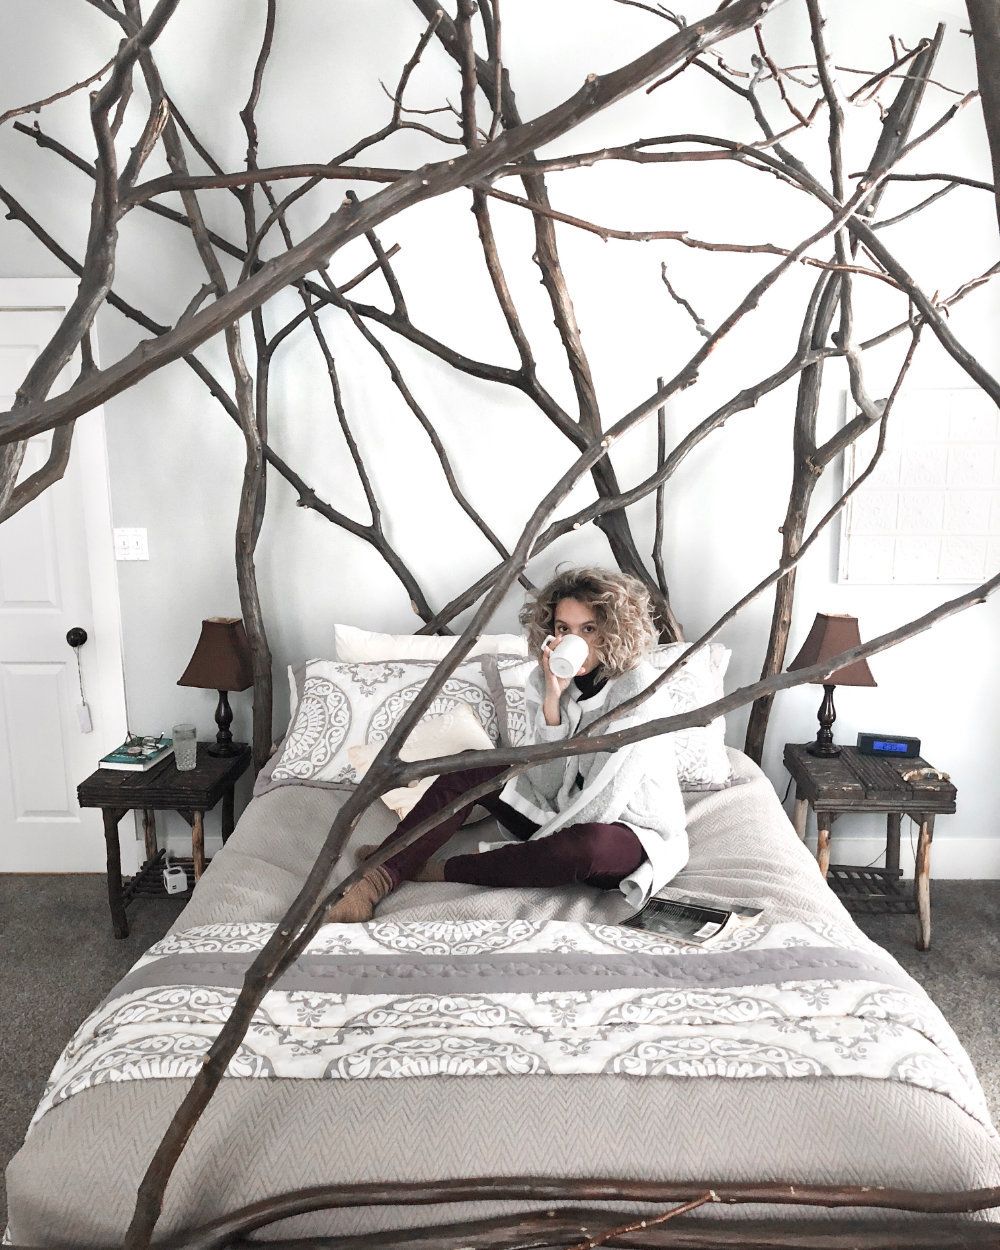 Woman drinking coffee while sitting on the bed with a book. Image is shot from the end of the bed through the tree branch bed frame.